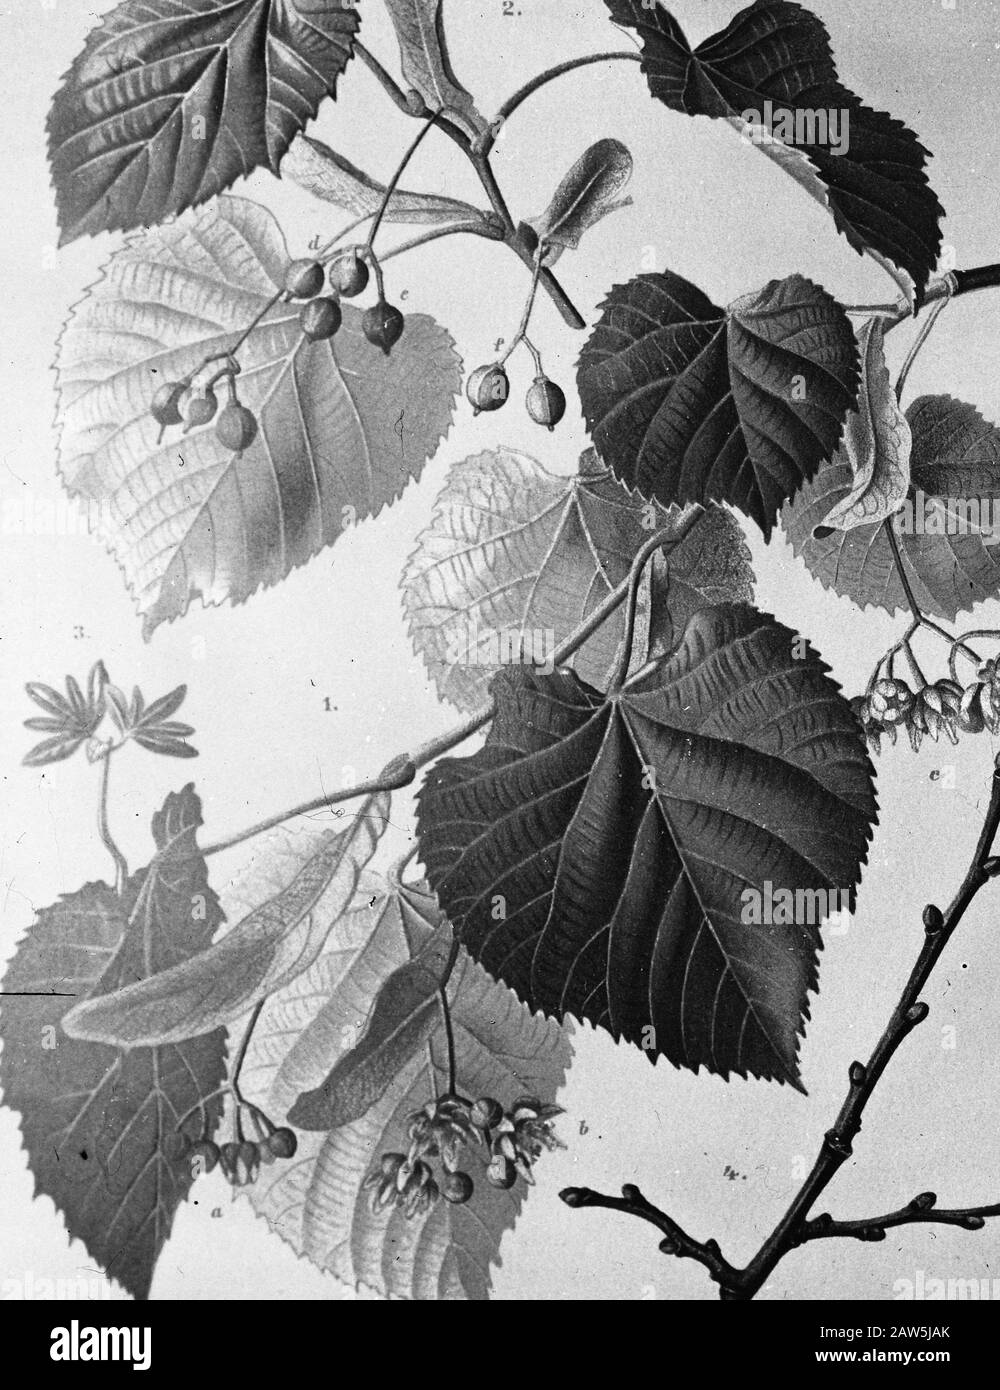 deciduous, trees, forests, avenues, botanical, Tilia tomentosa (silver linden) Date: undated Keywords: trees, forests, botanical, avenues, hardwood Person Name: Tilia tomentosa (silver lime) Stock Photo